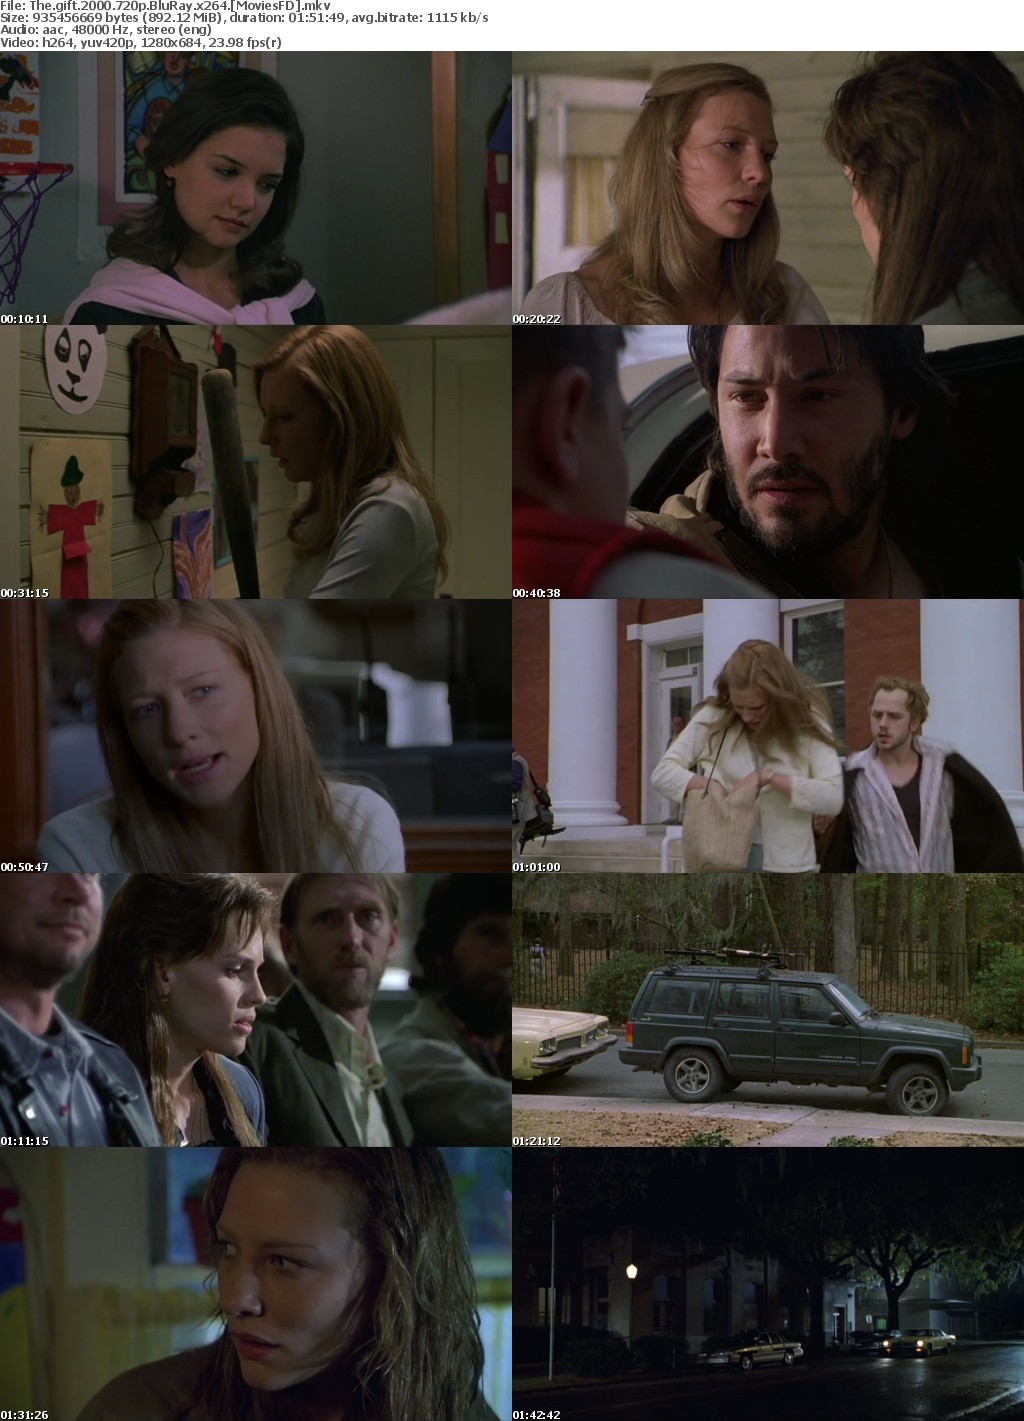 The Gift (2000) 720P Bluray X264 Moviesfd